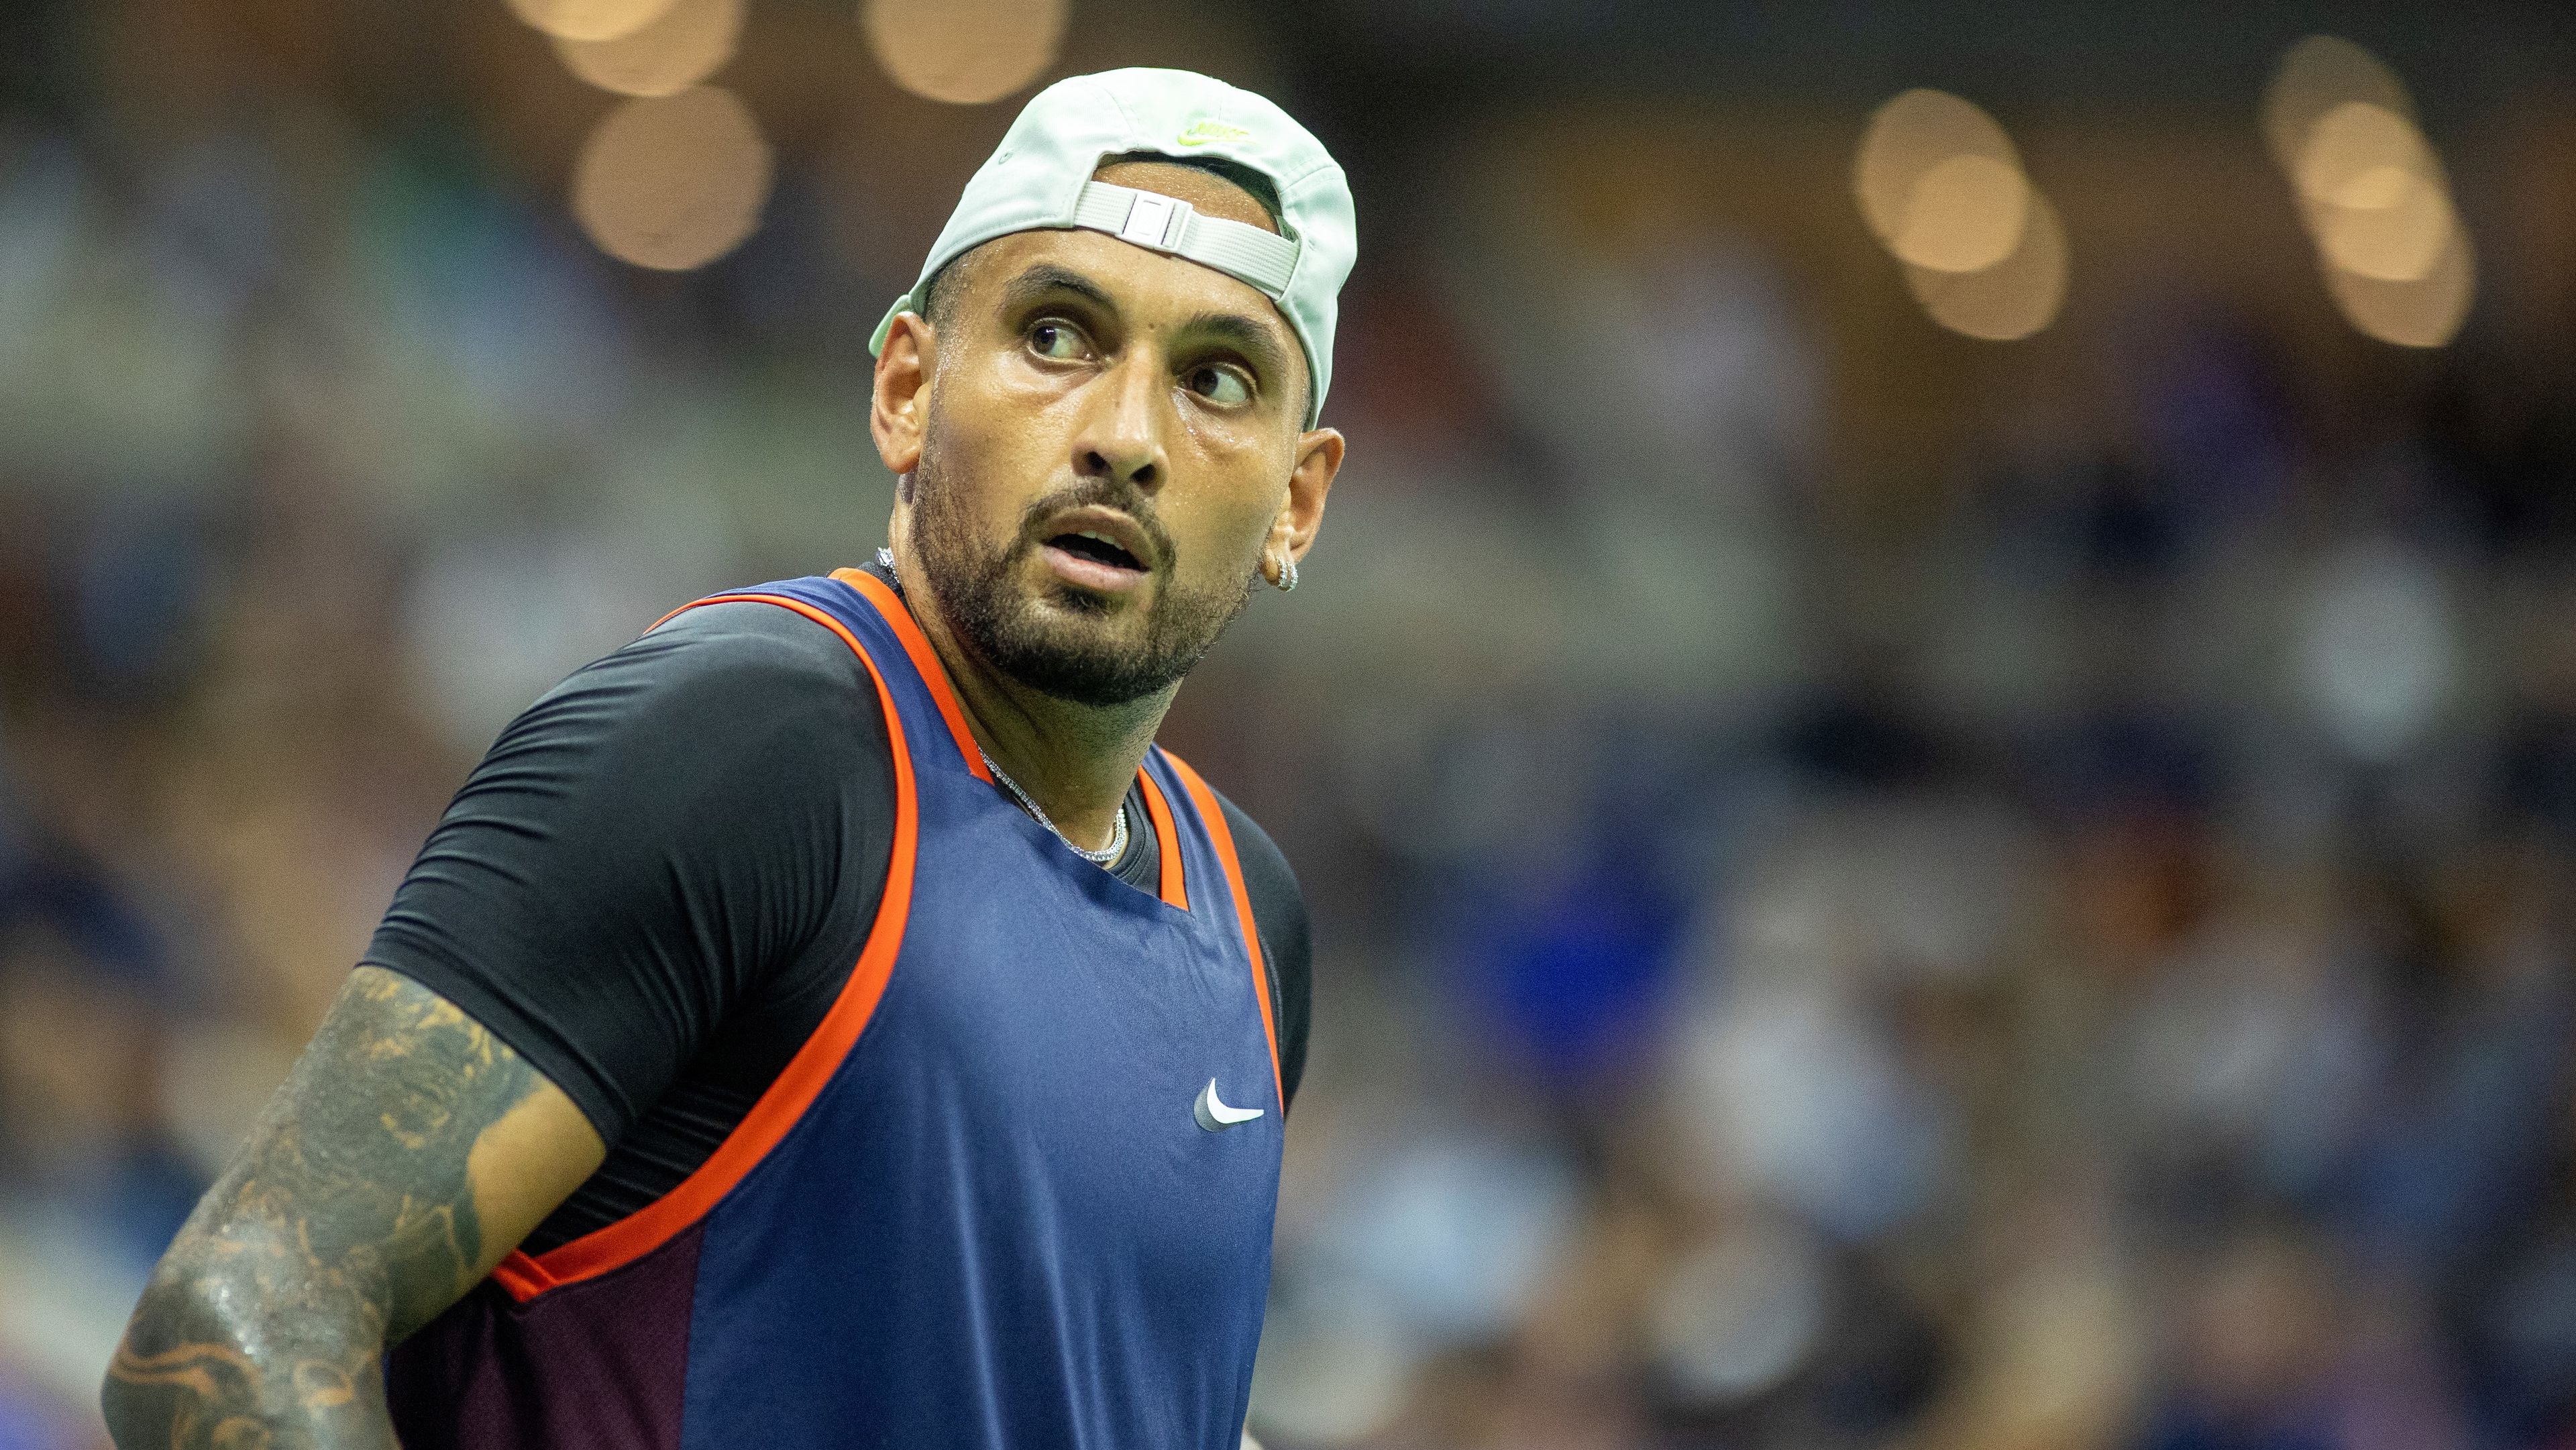 Nick Kyrgios says Australians have been are ungrateful the seven years prior to his Wimbledon success.